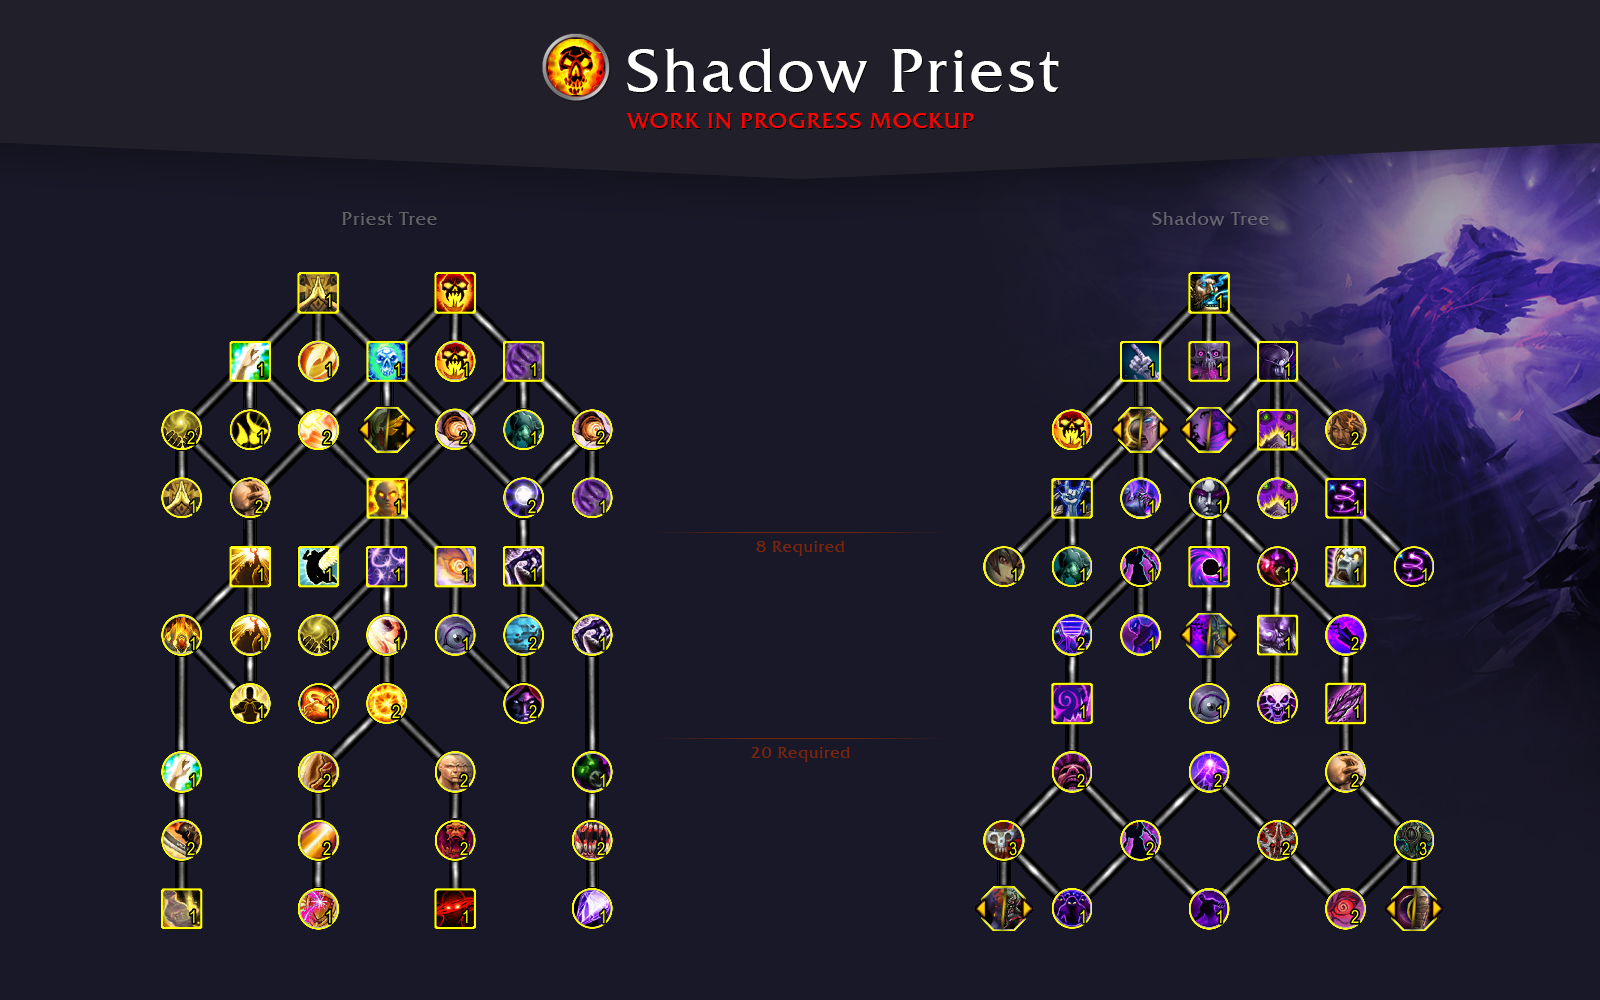 Death Knight Dragonflight Talent Tree Preview for All Specs - Wowhead News